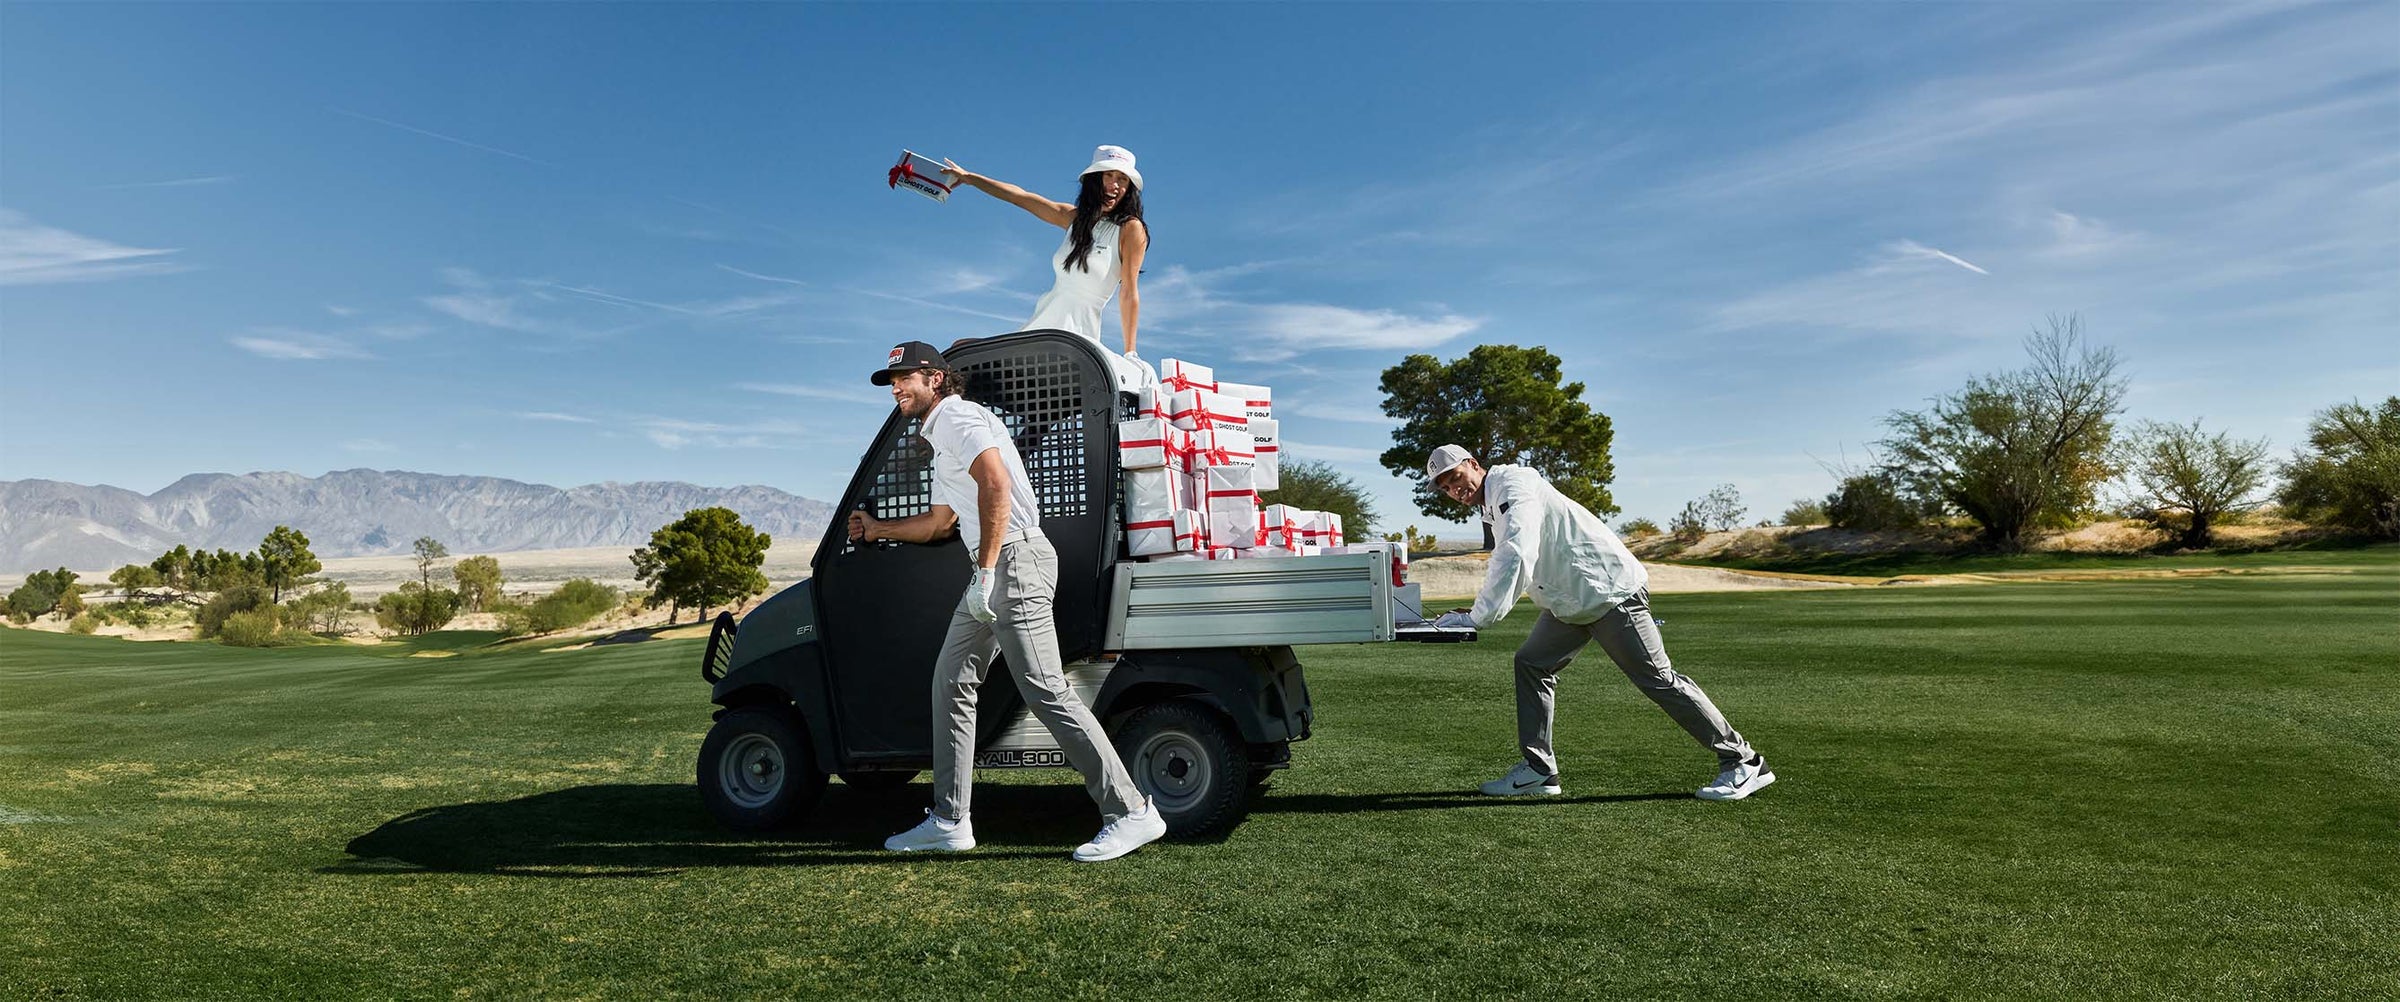 2 Men Pushing a Golf Cart with Gift Boxes and a Women on top of the cart